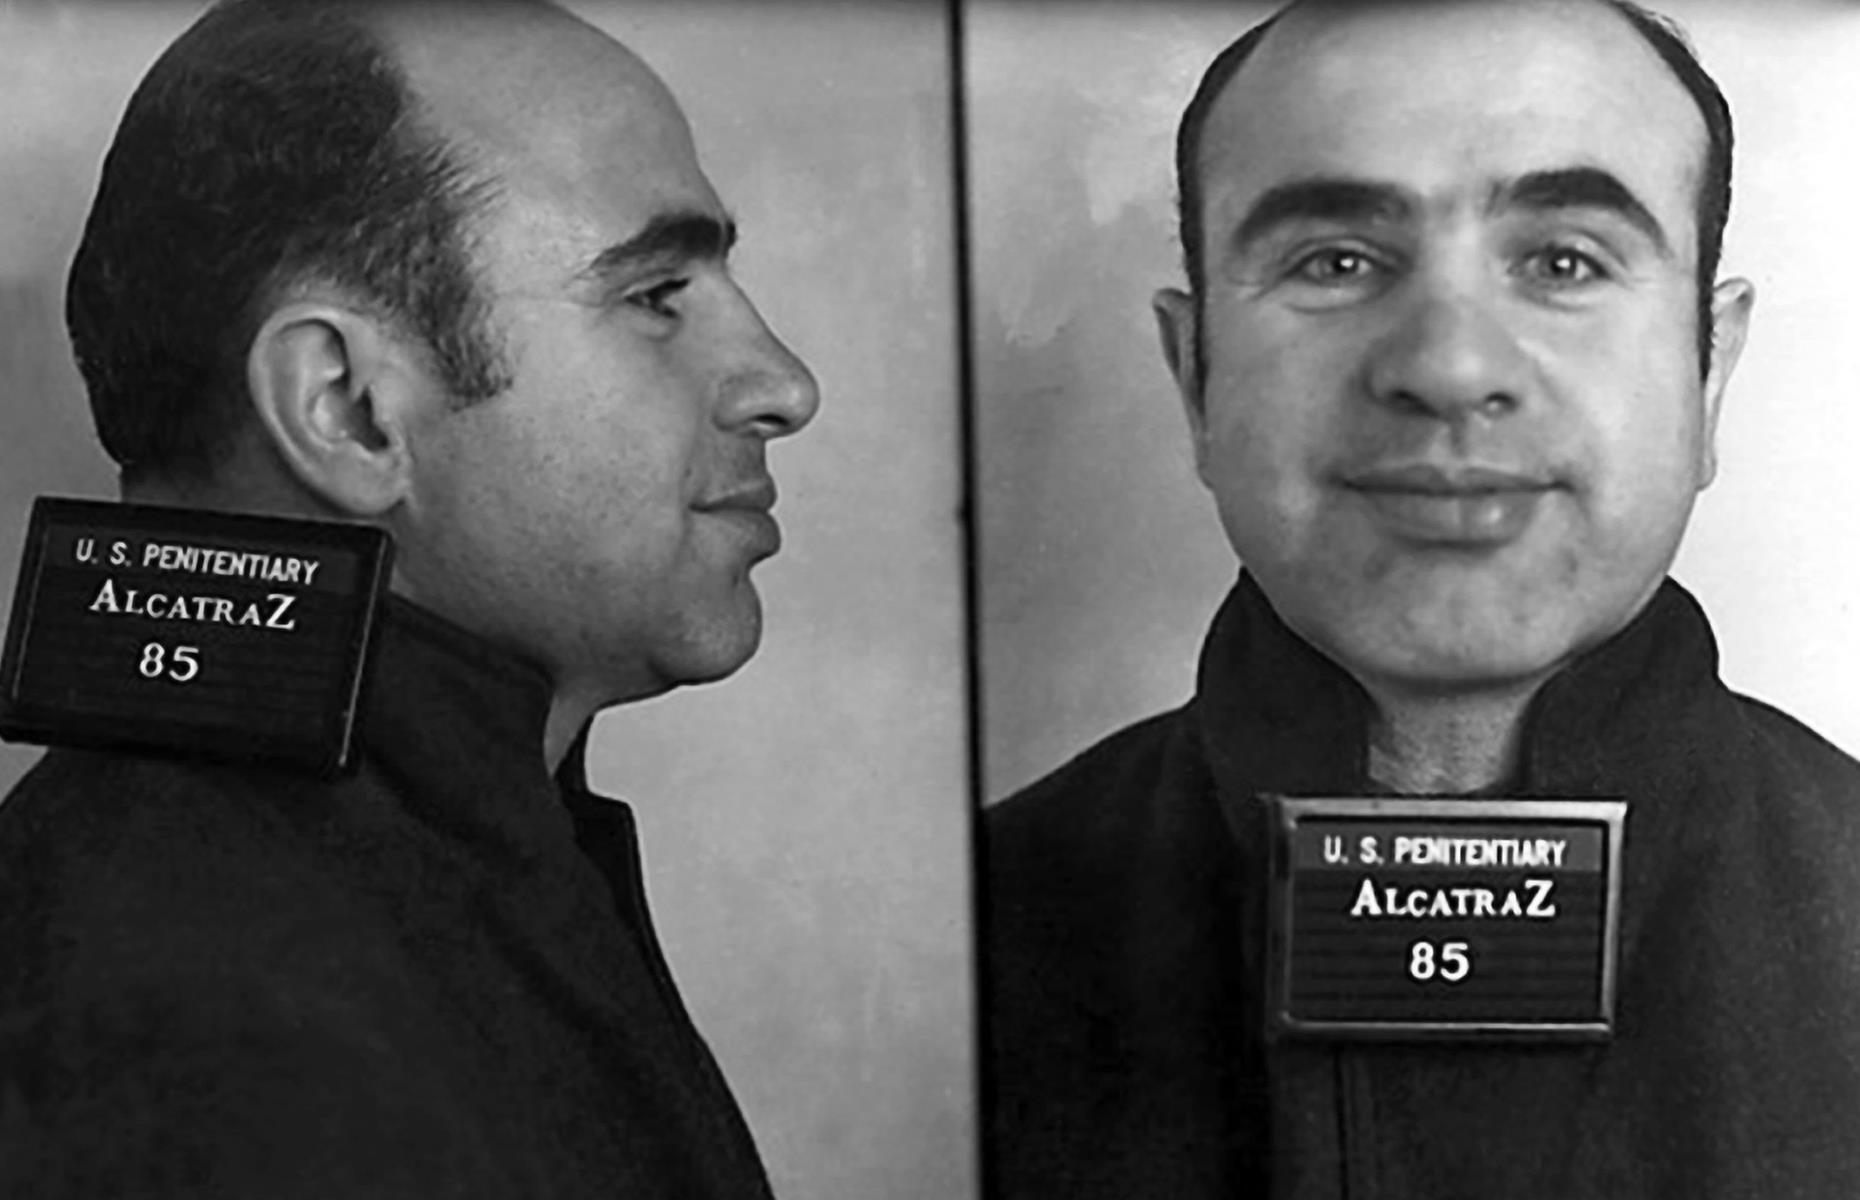 <p>Of all the formidable prisoners confined at Alcatraz, perhaps no one is more famous than Al Capone. The Chicago gangster's criminal pedigree was seemingly endless – bootlegging, gambling, robbery, murder, and more – and for seven years he controlled one of America's deadliest and most influential crime rings. He was first arrested in 1929 in Philadelphia for carrying a concealed weapon, but was released from prison just nine months later for good behavior.</p>